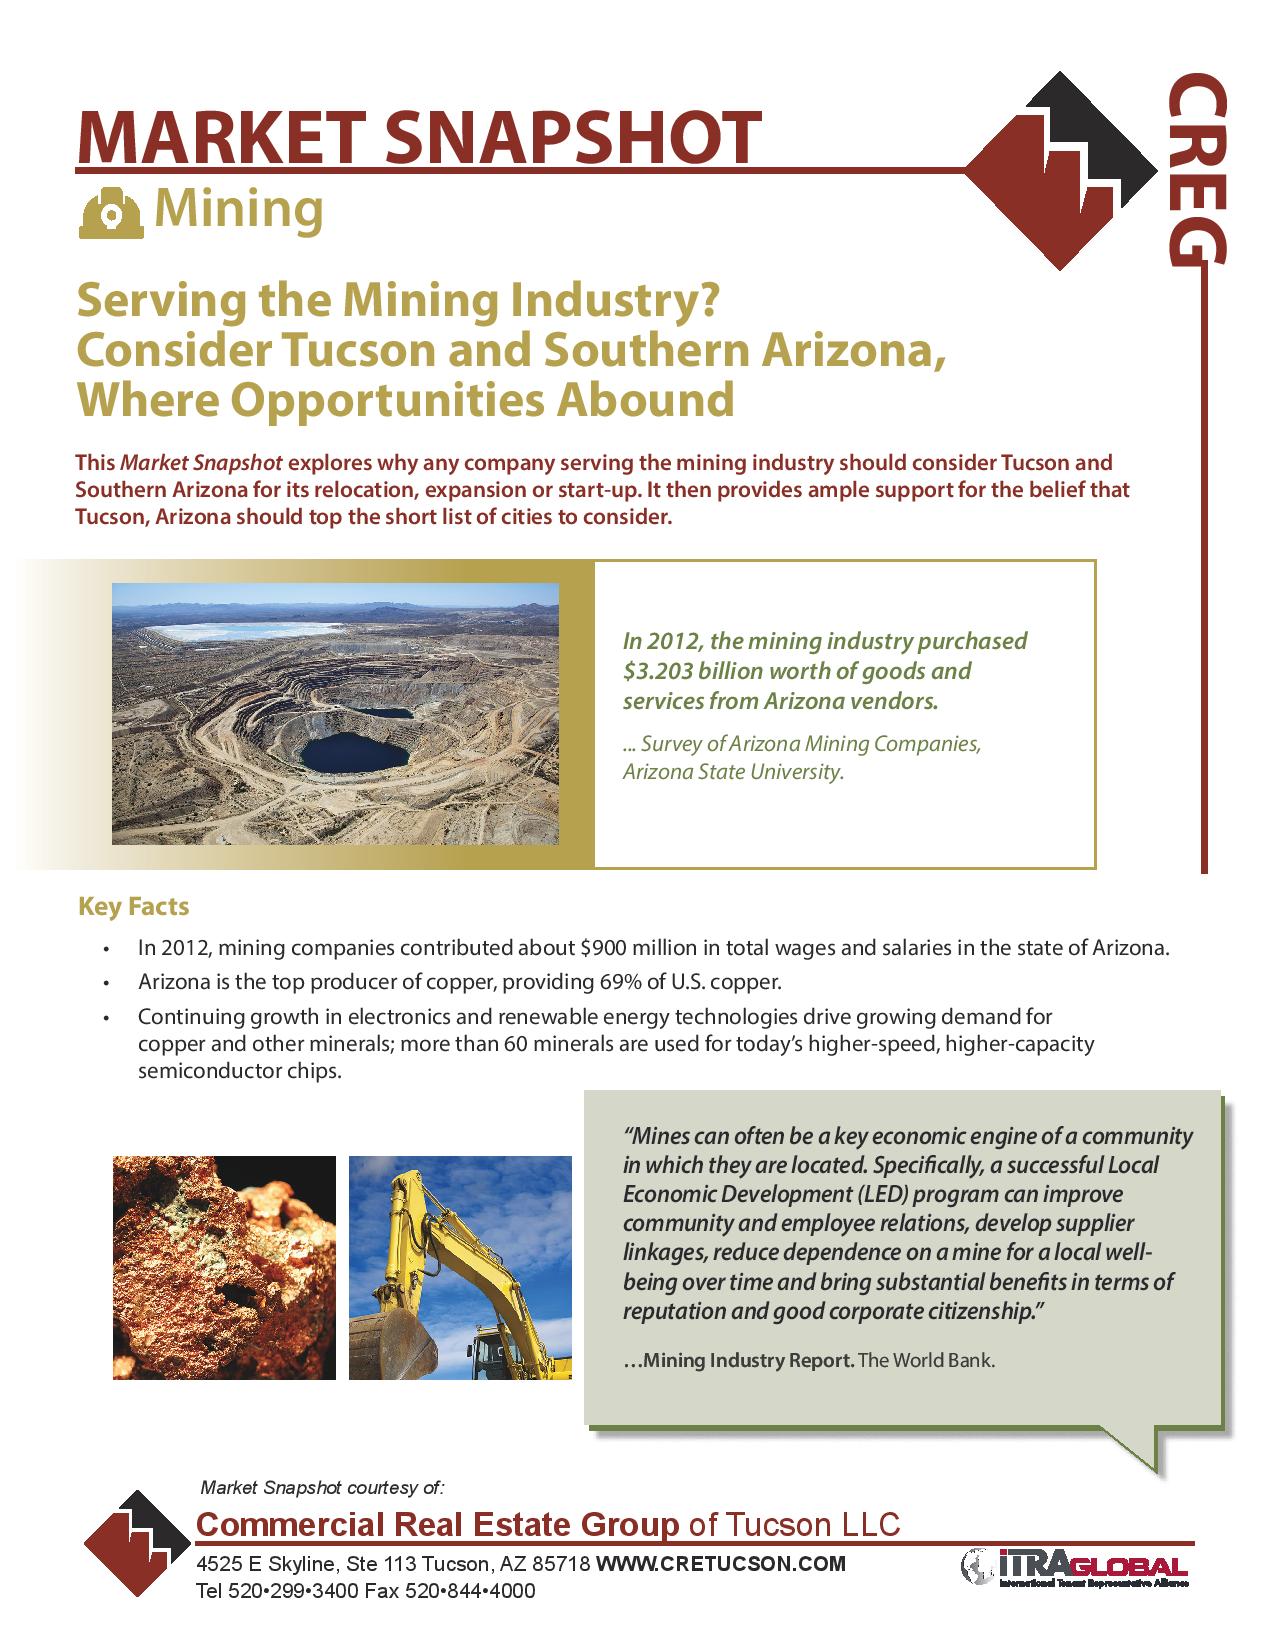 Mining Market Snapshot for Tucson, Arizona - Your Trusted Commercial ...